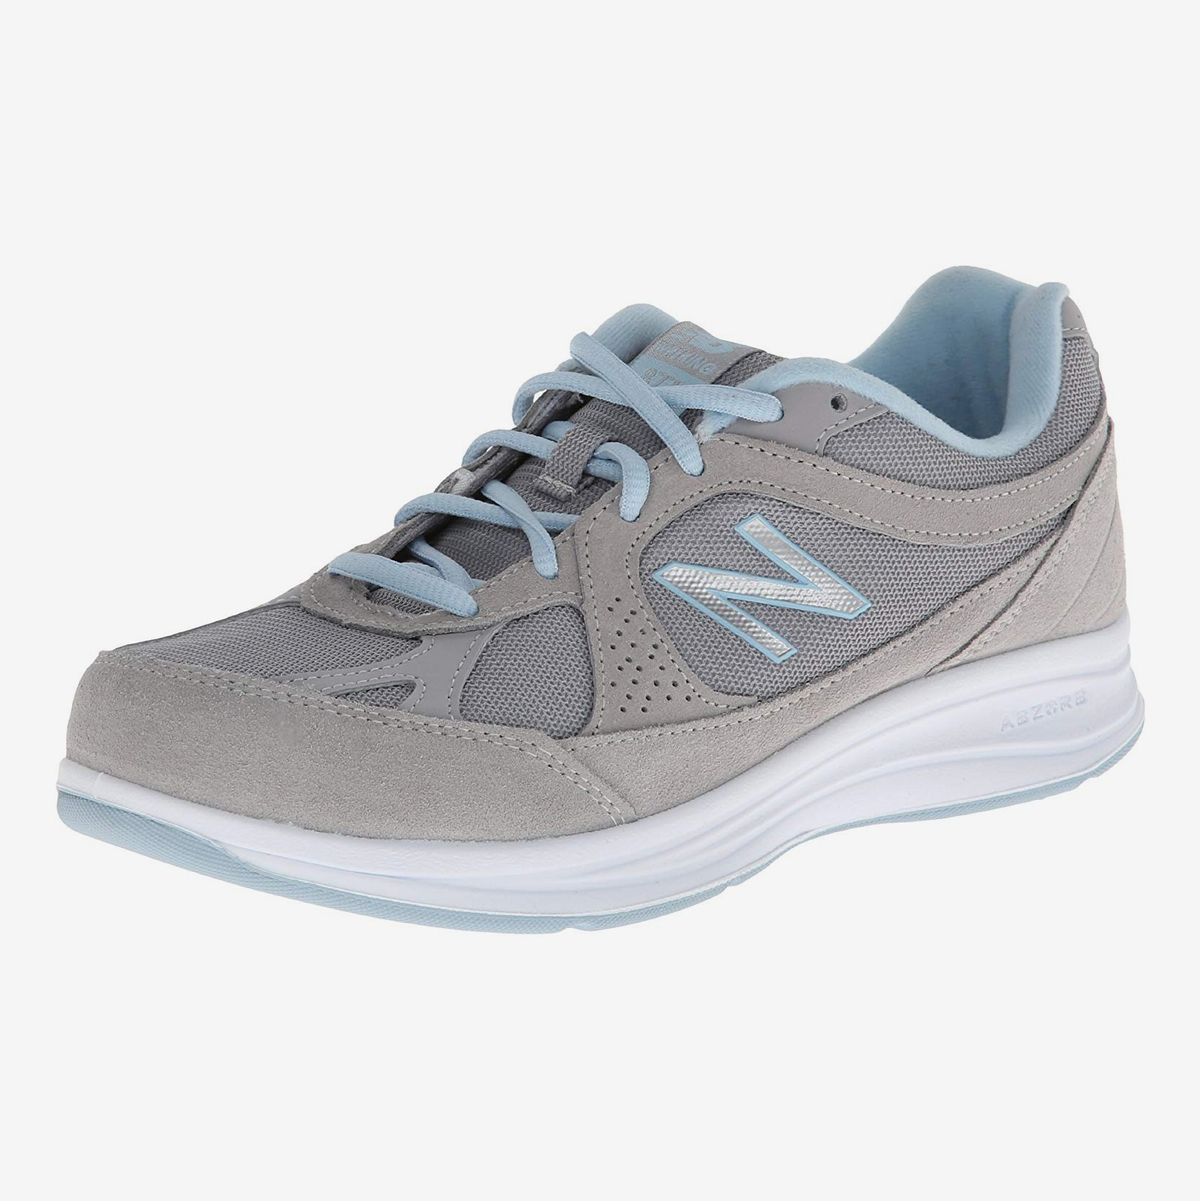 lightweight tennis shoes with arch support